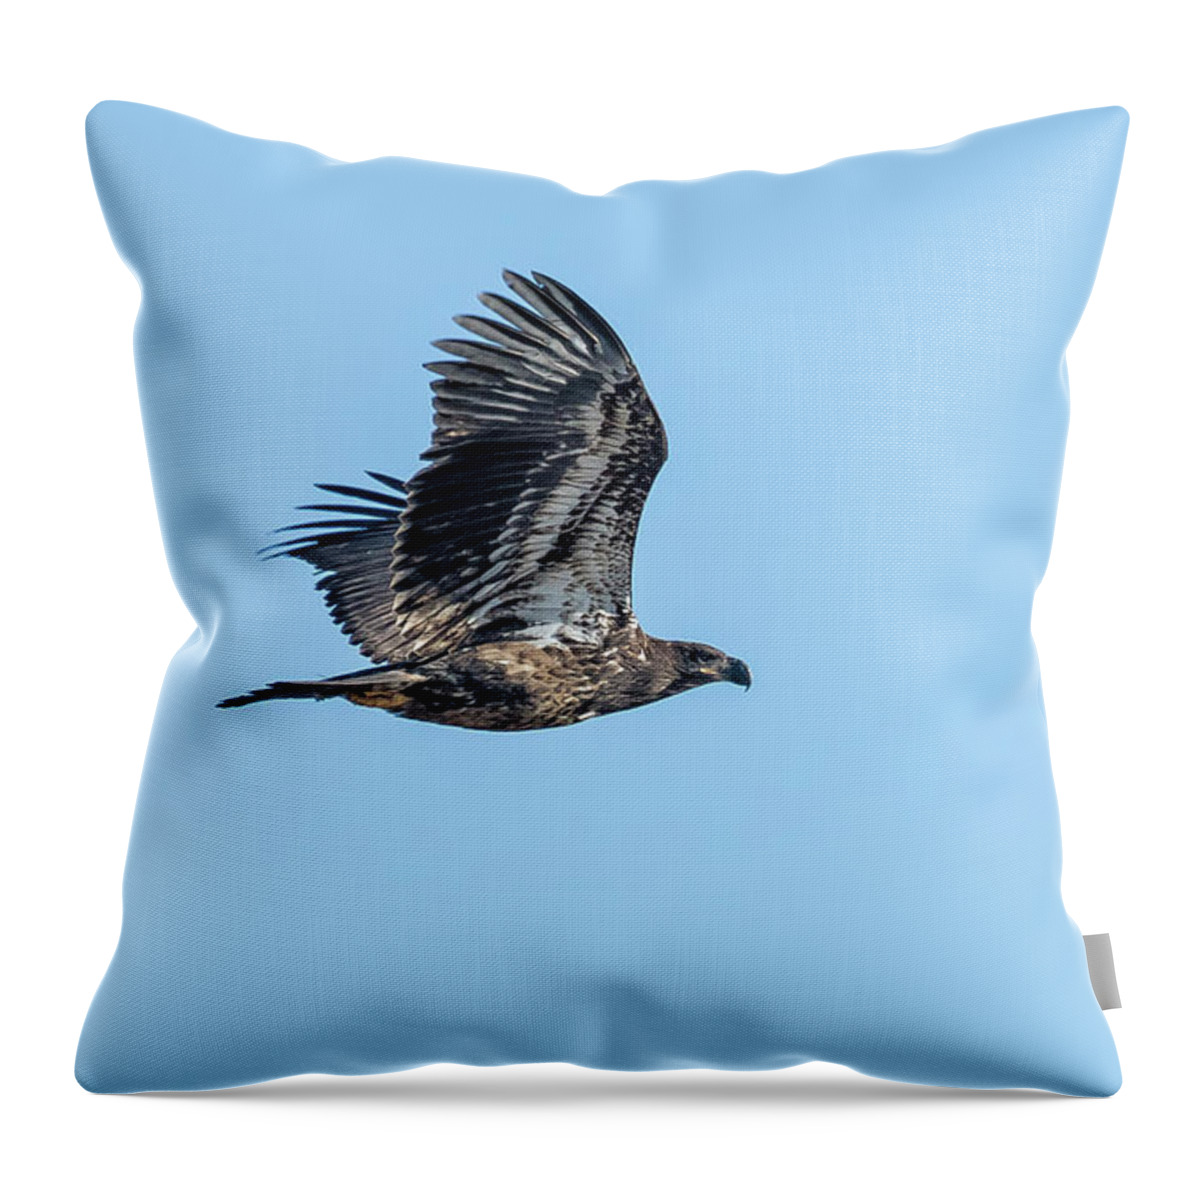 Bald Eagle Throw Pillow featuring the photograph Juvenile Bald Eagle Soaring by Belinda Greb